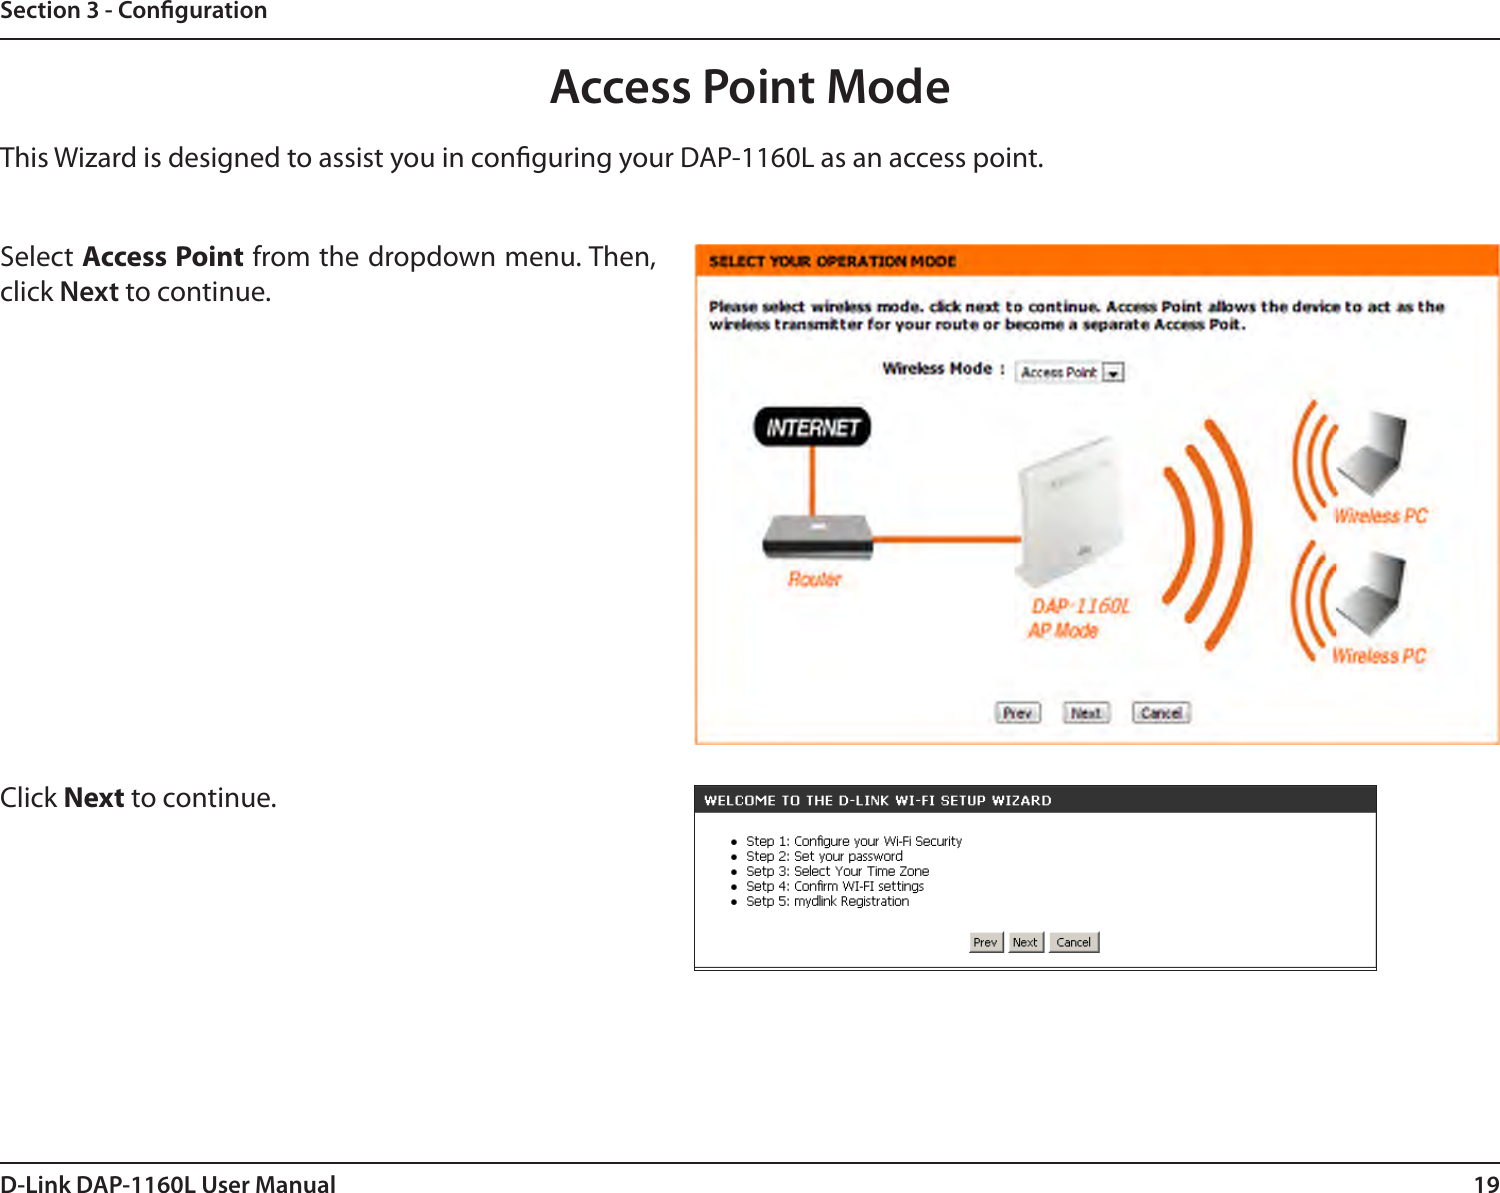 19D-Link DAP-1160L User ManualSection 3 - CongurationThis Wizard is designed to assist you in conguring your DAP-1160L as an access point.Access Point ModeSelect Access Point from the dropdown menu. Then, click Next to continue. Click Next to continue. 